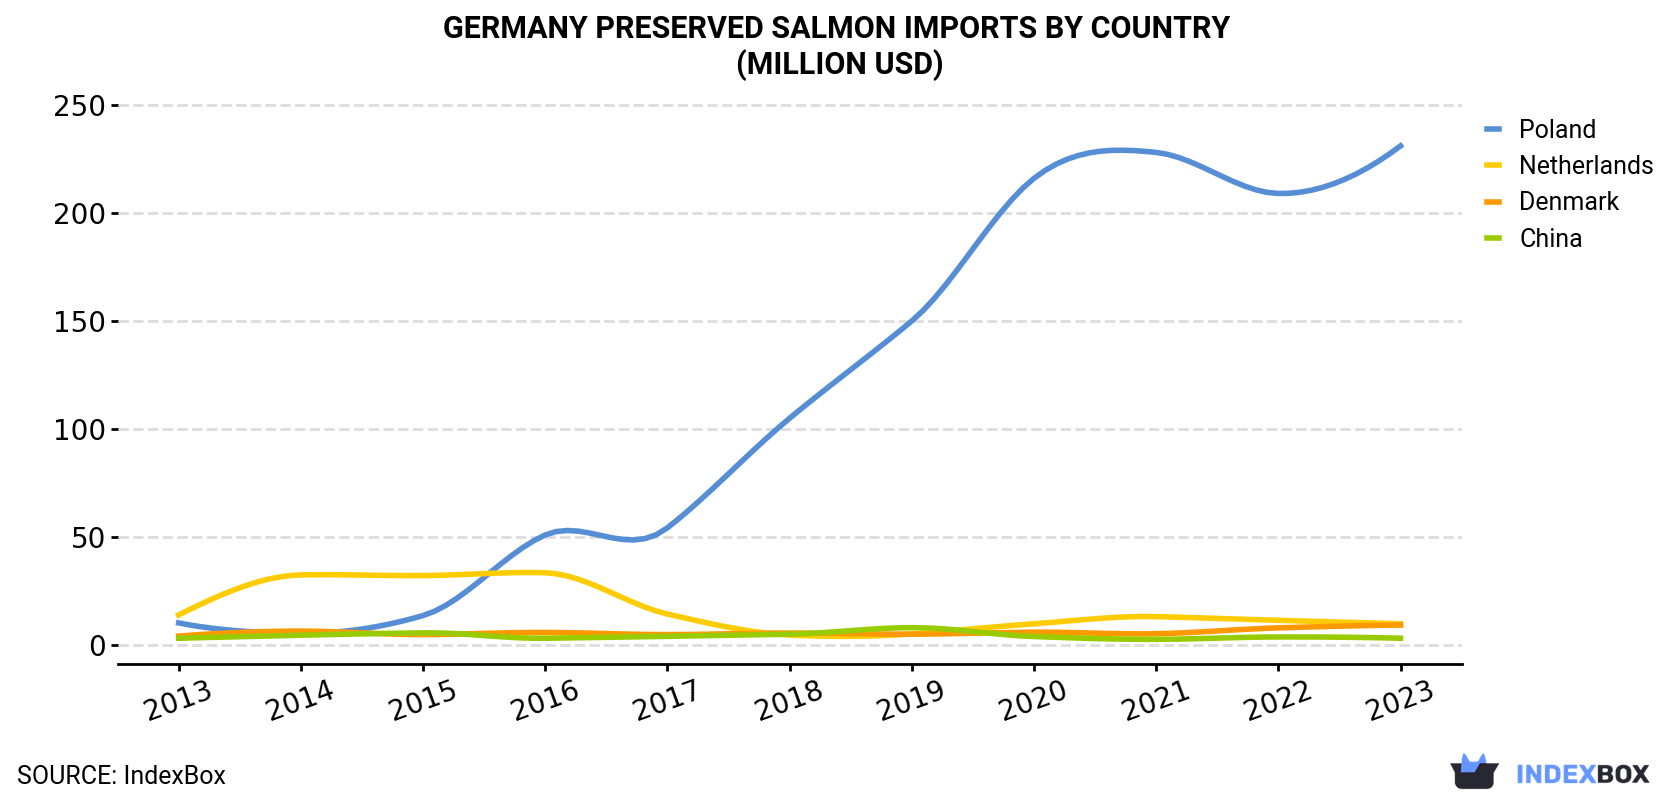 Germany Preserved Salmon Imports By Country (Million USD)